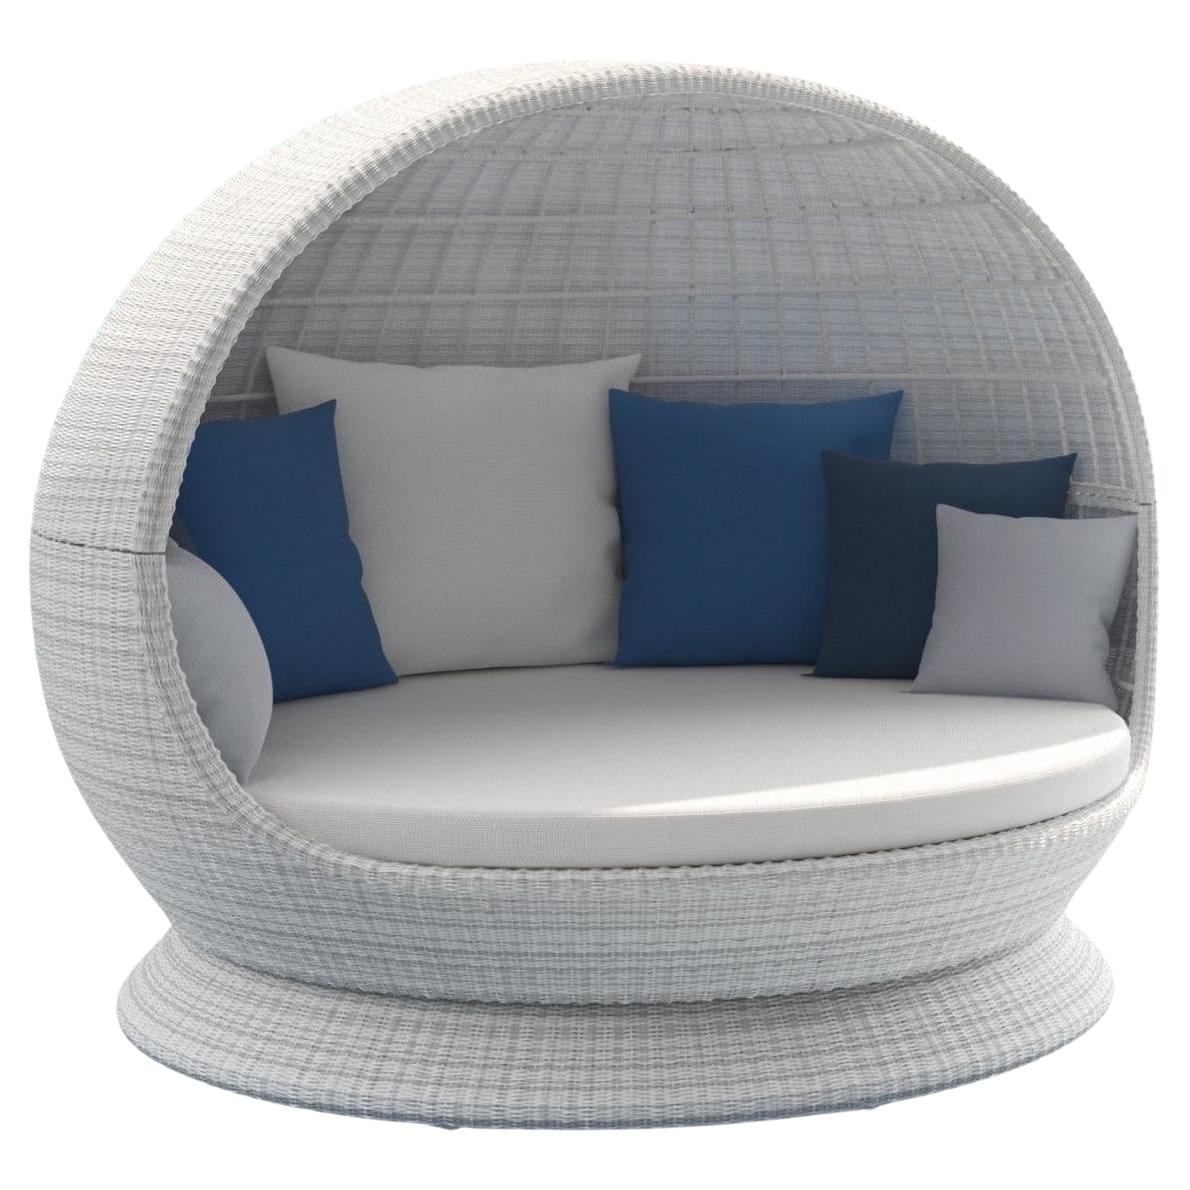  360° Rotating Scoop Daybed In Woven Wicker For Sale